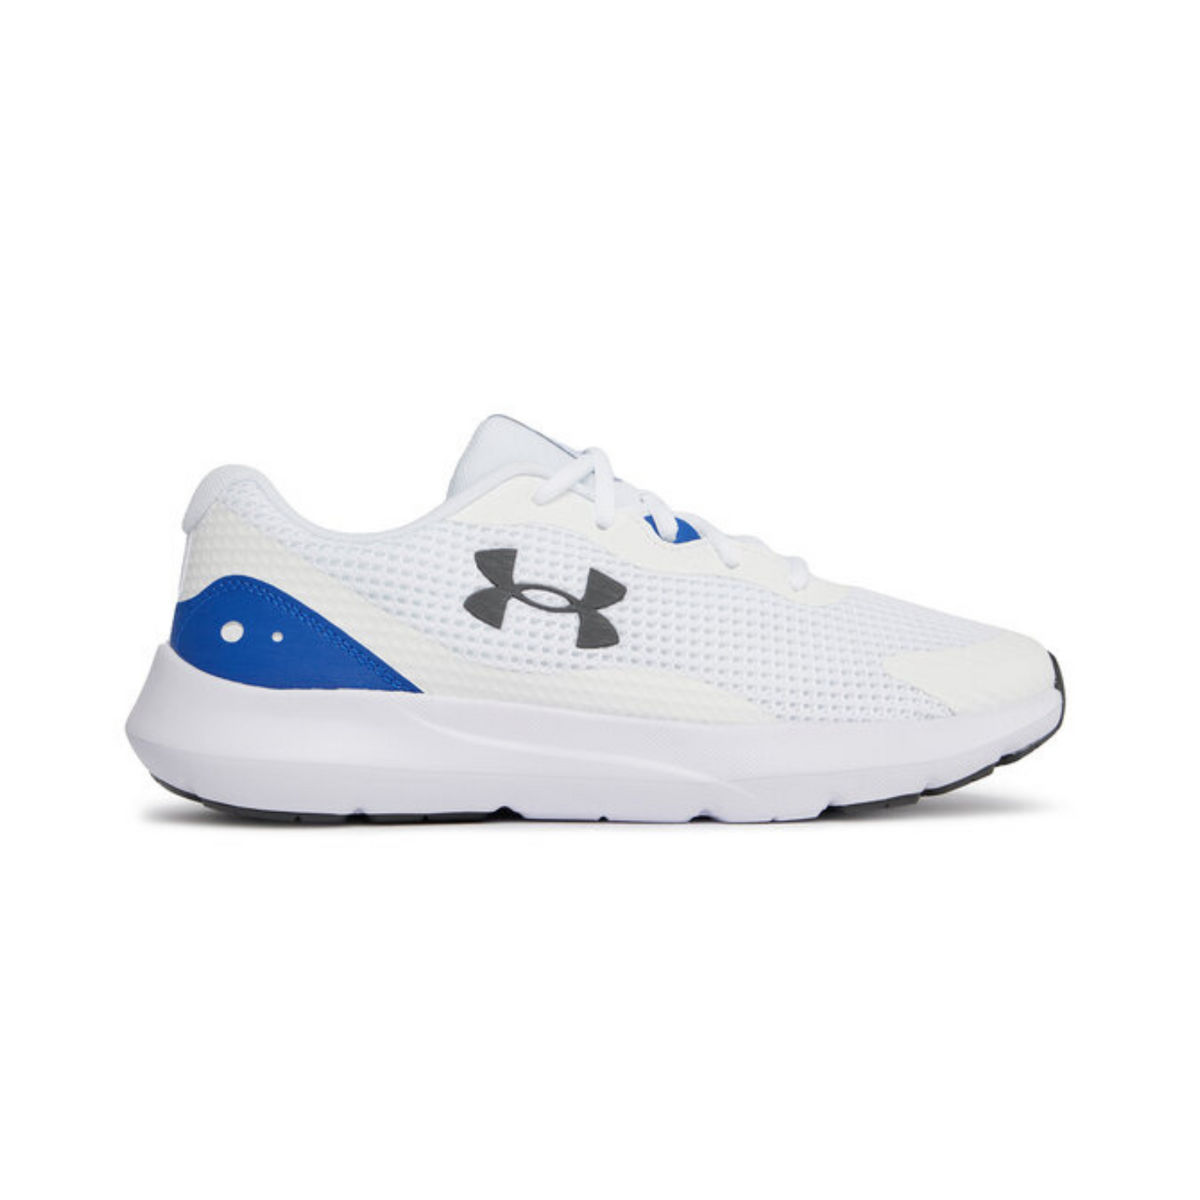 Under Armour Surge 3 3024883 Running Shoes Mens